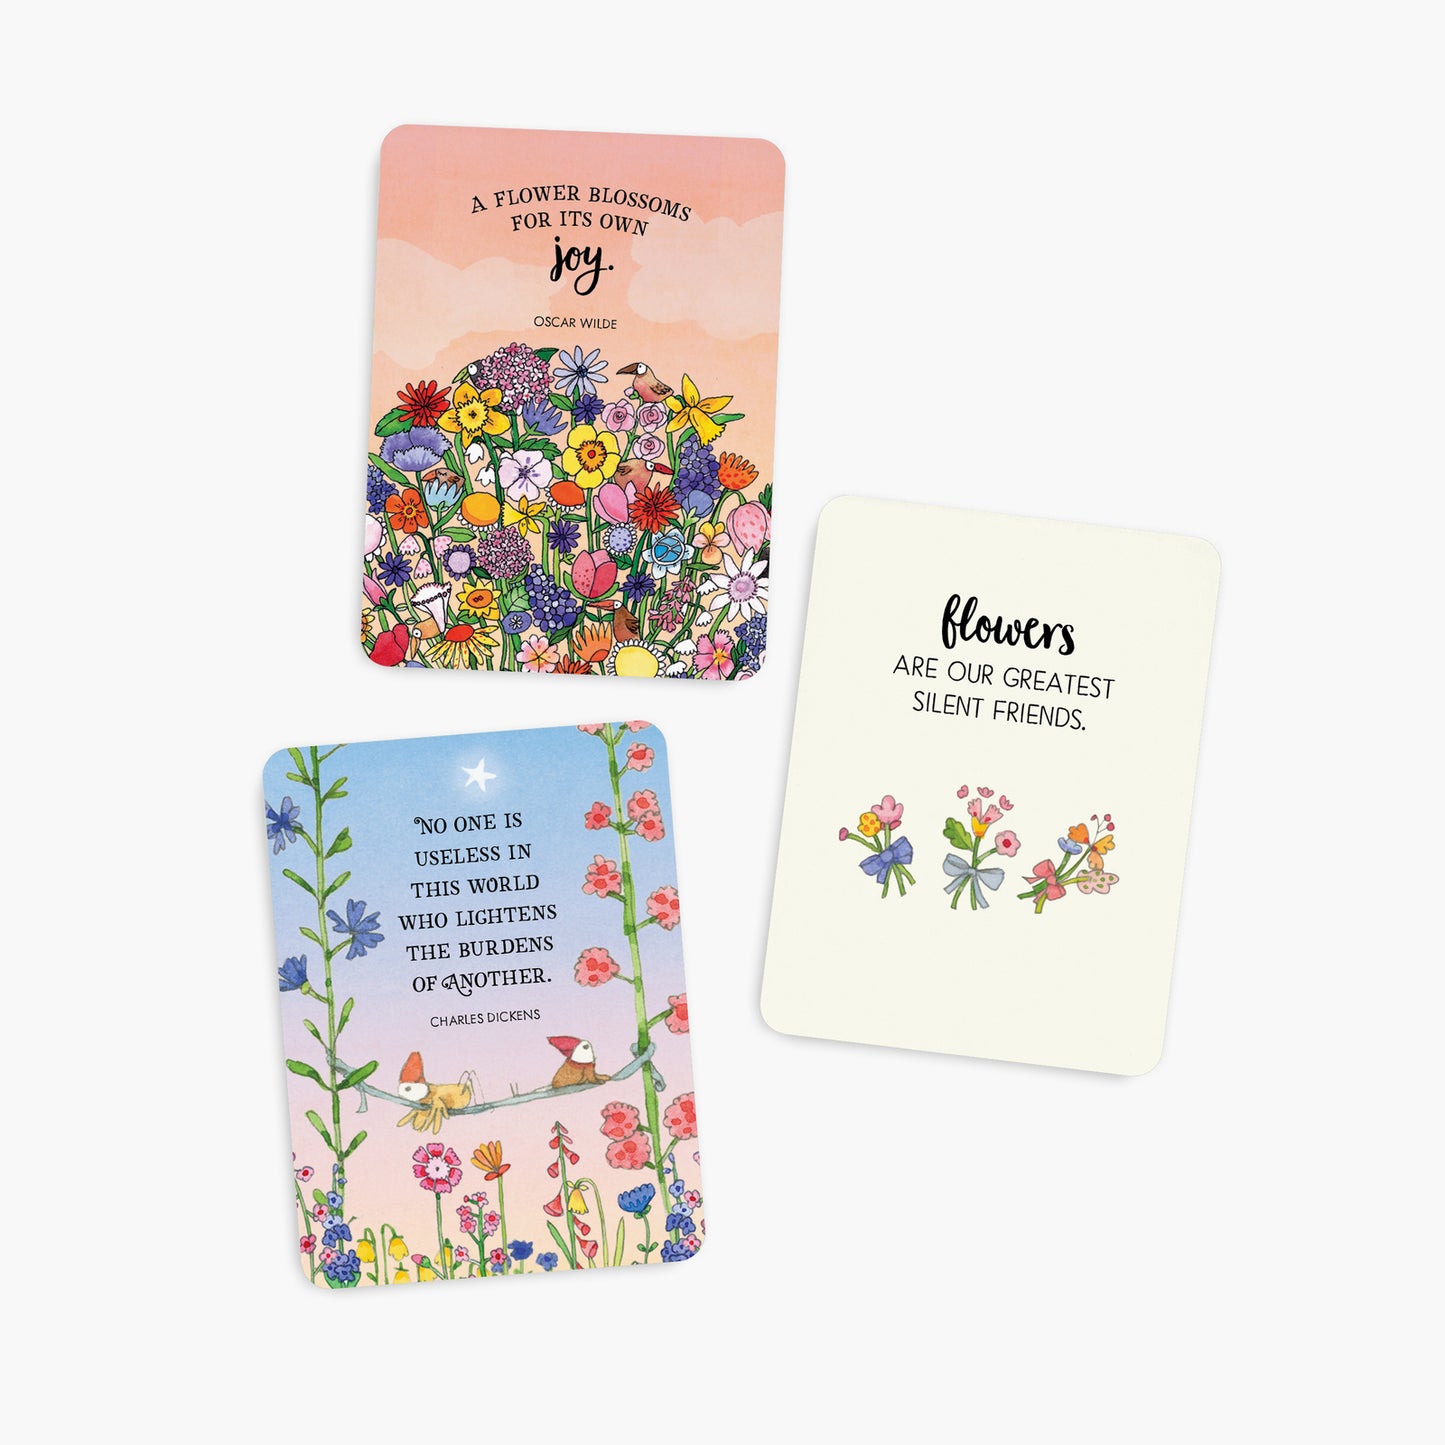 A Little Box Of Flowers Affirmations